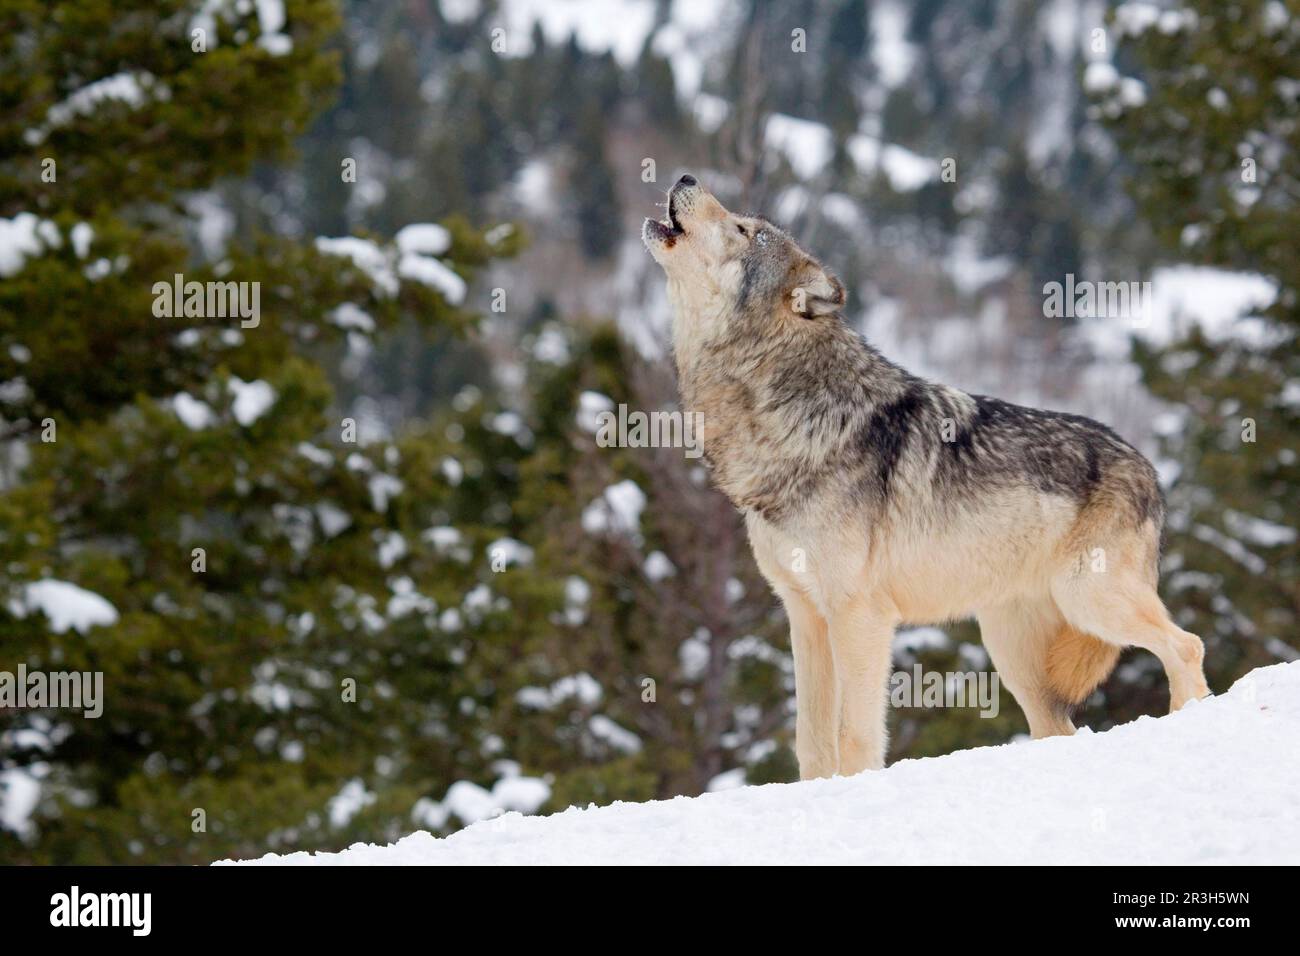 Wolf, gray wolves (Canis lupus), canine species, predators, mammals, animals, Grey Wolf adult, howling, standing in snow, utricularia ochroleuca (U.) Stock Photo